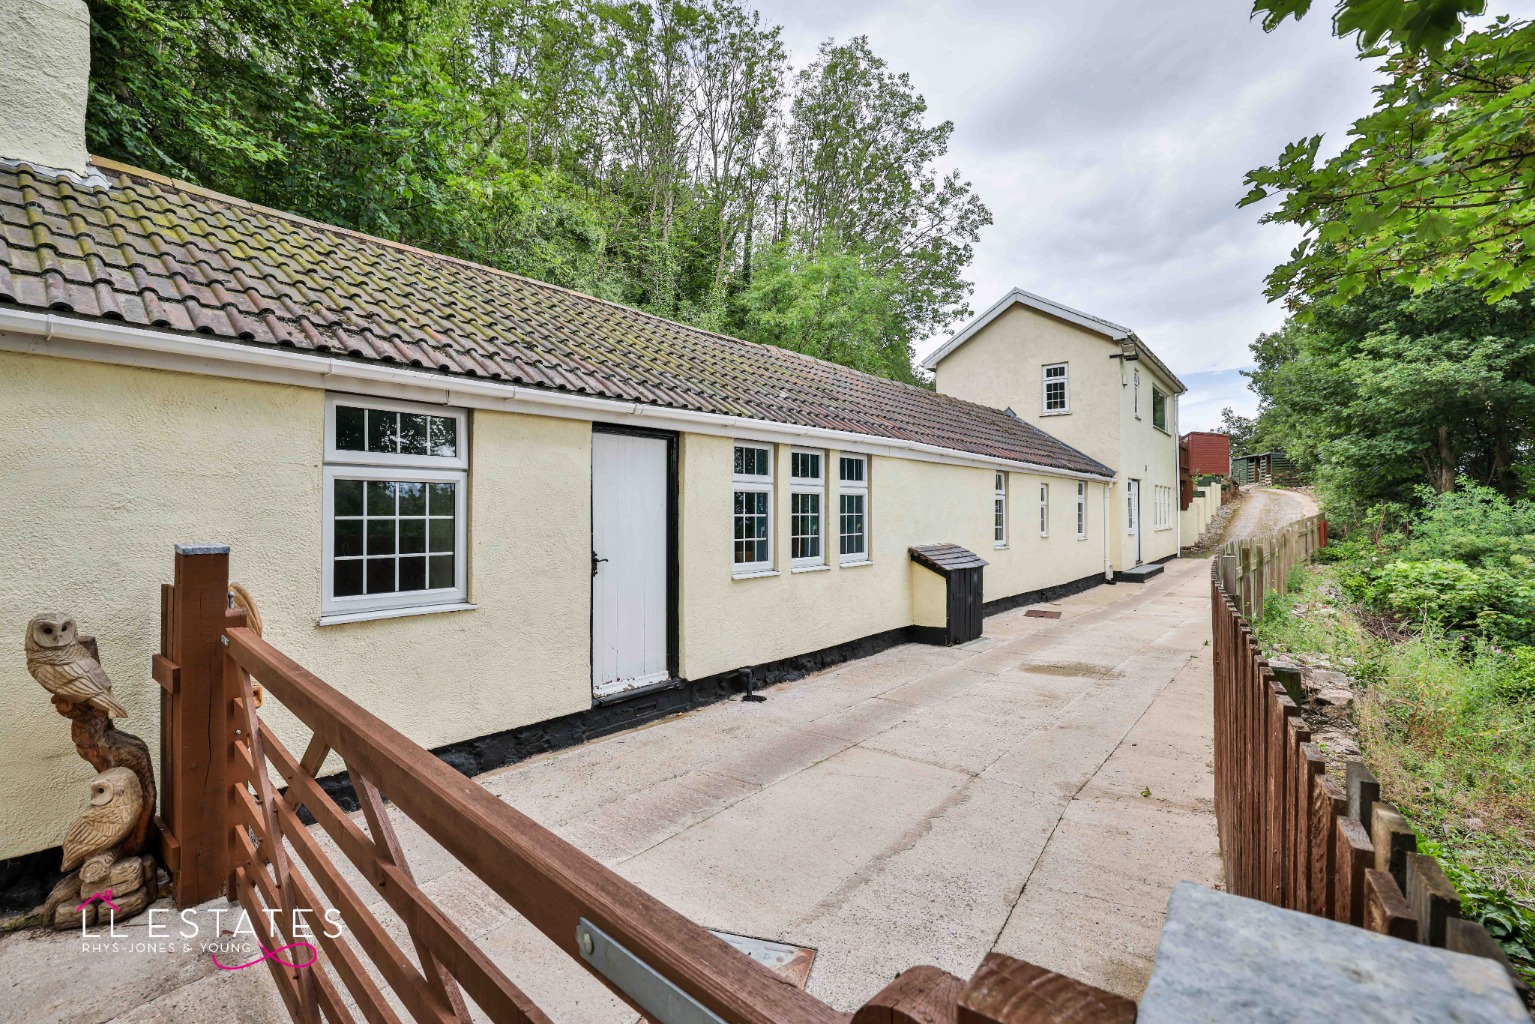 3 bed detached house for sale, Denbighshire  - Property Image 1